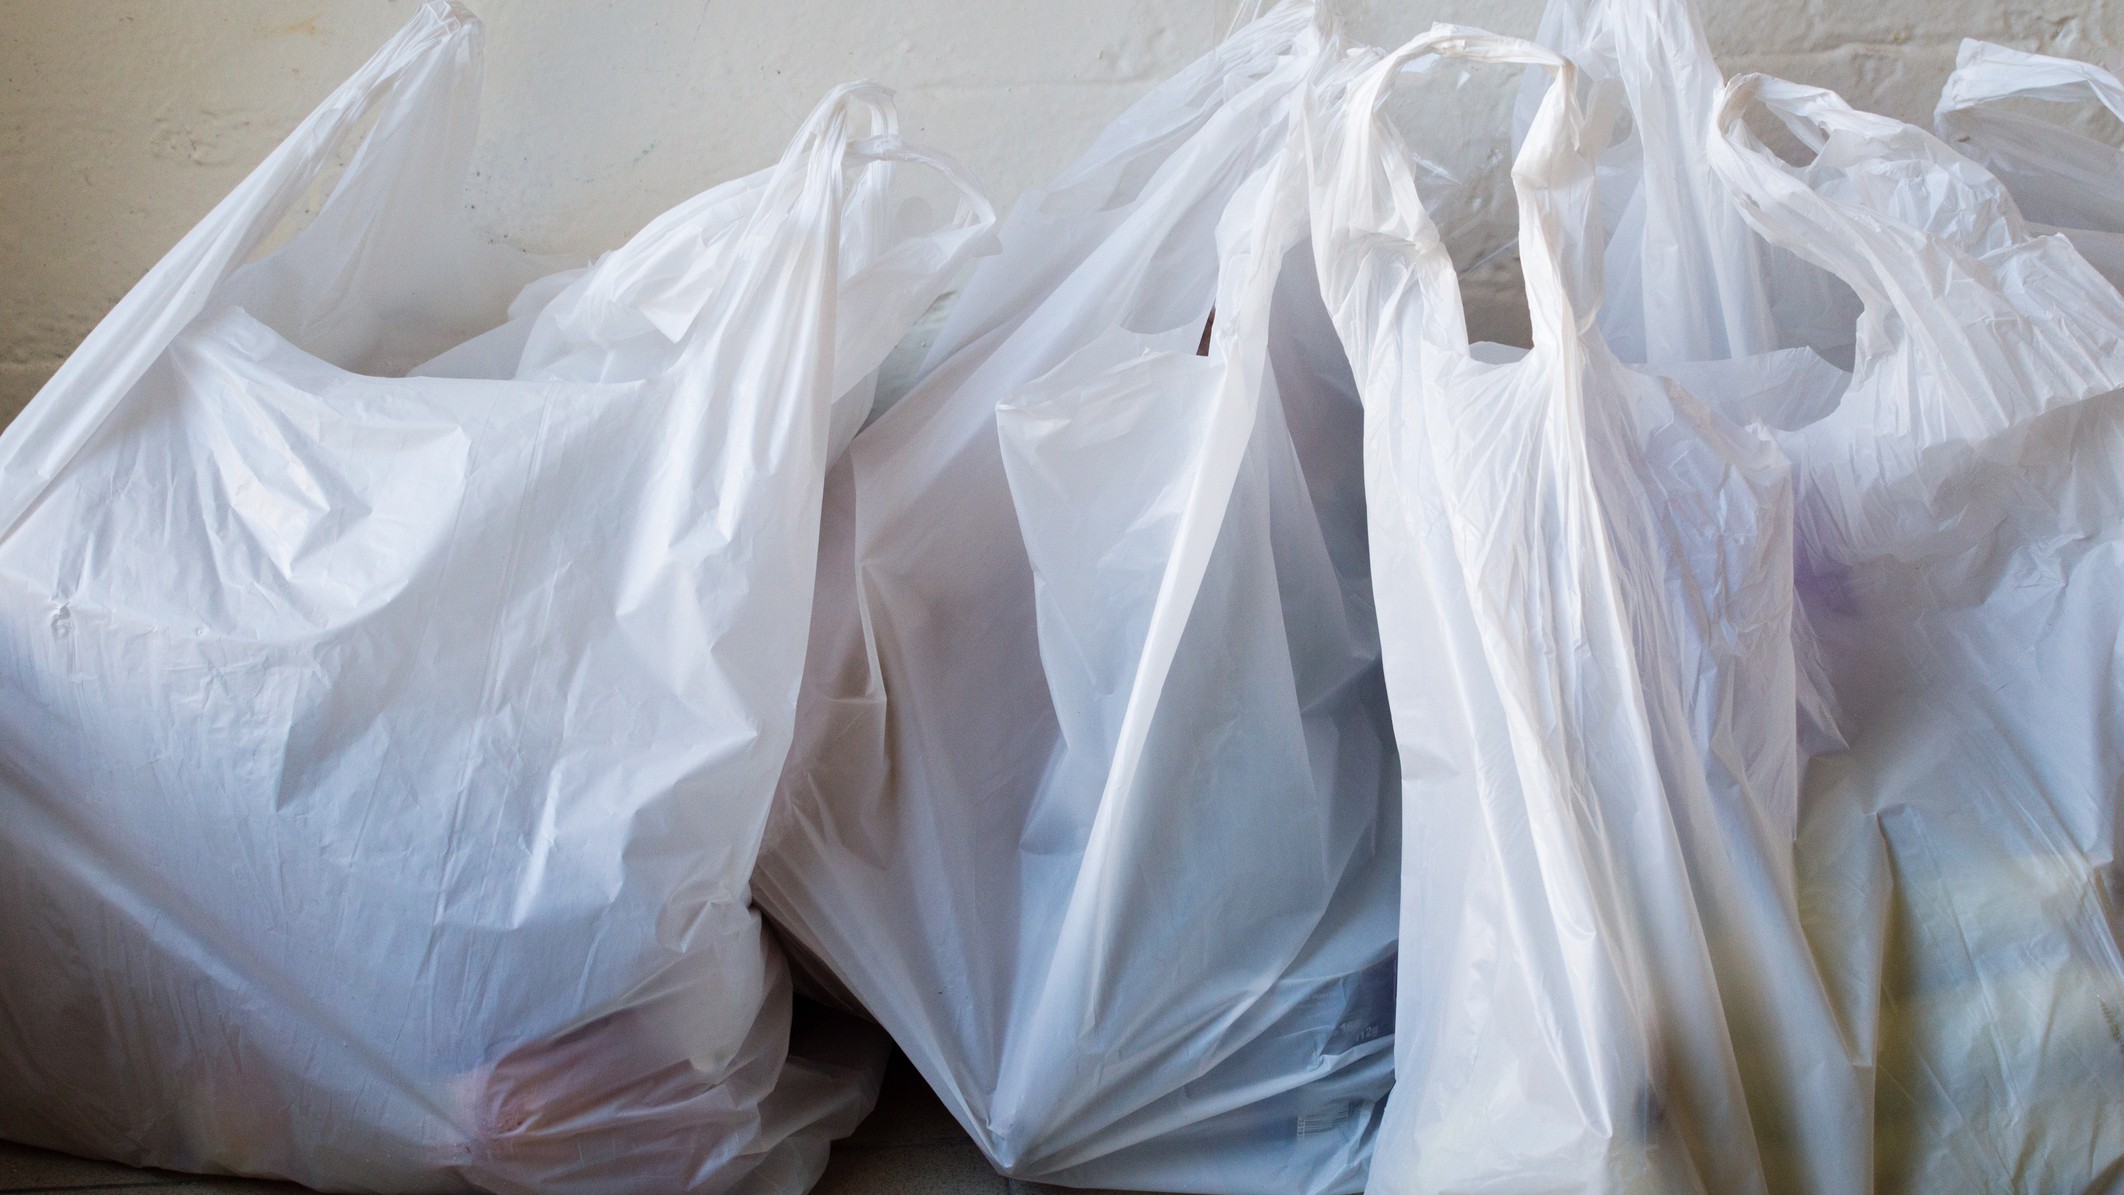 Plastic and paper bag ban passed by lawmakers heads to Murphy  njcom